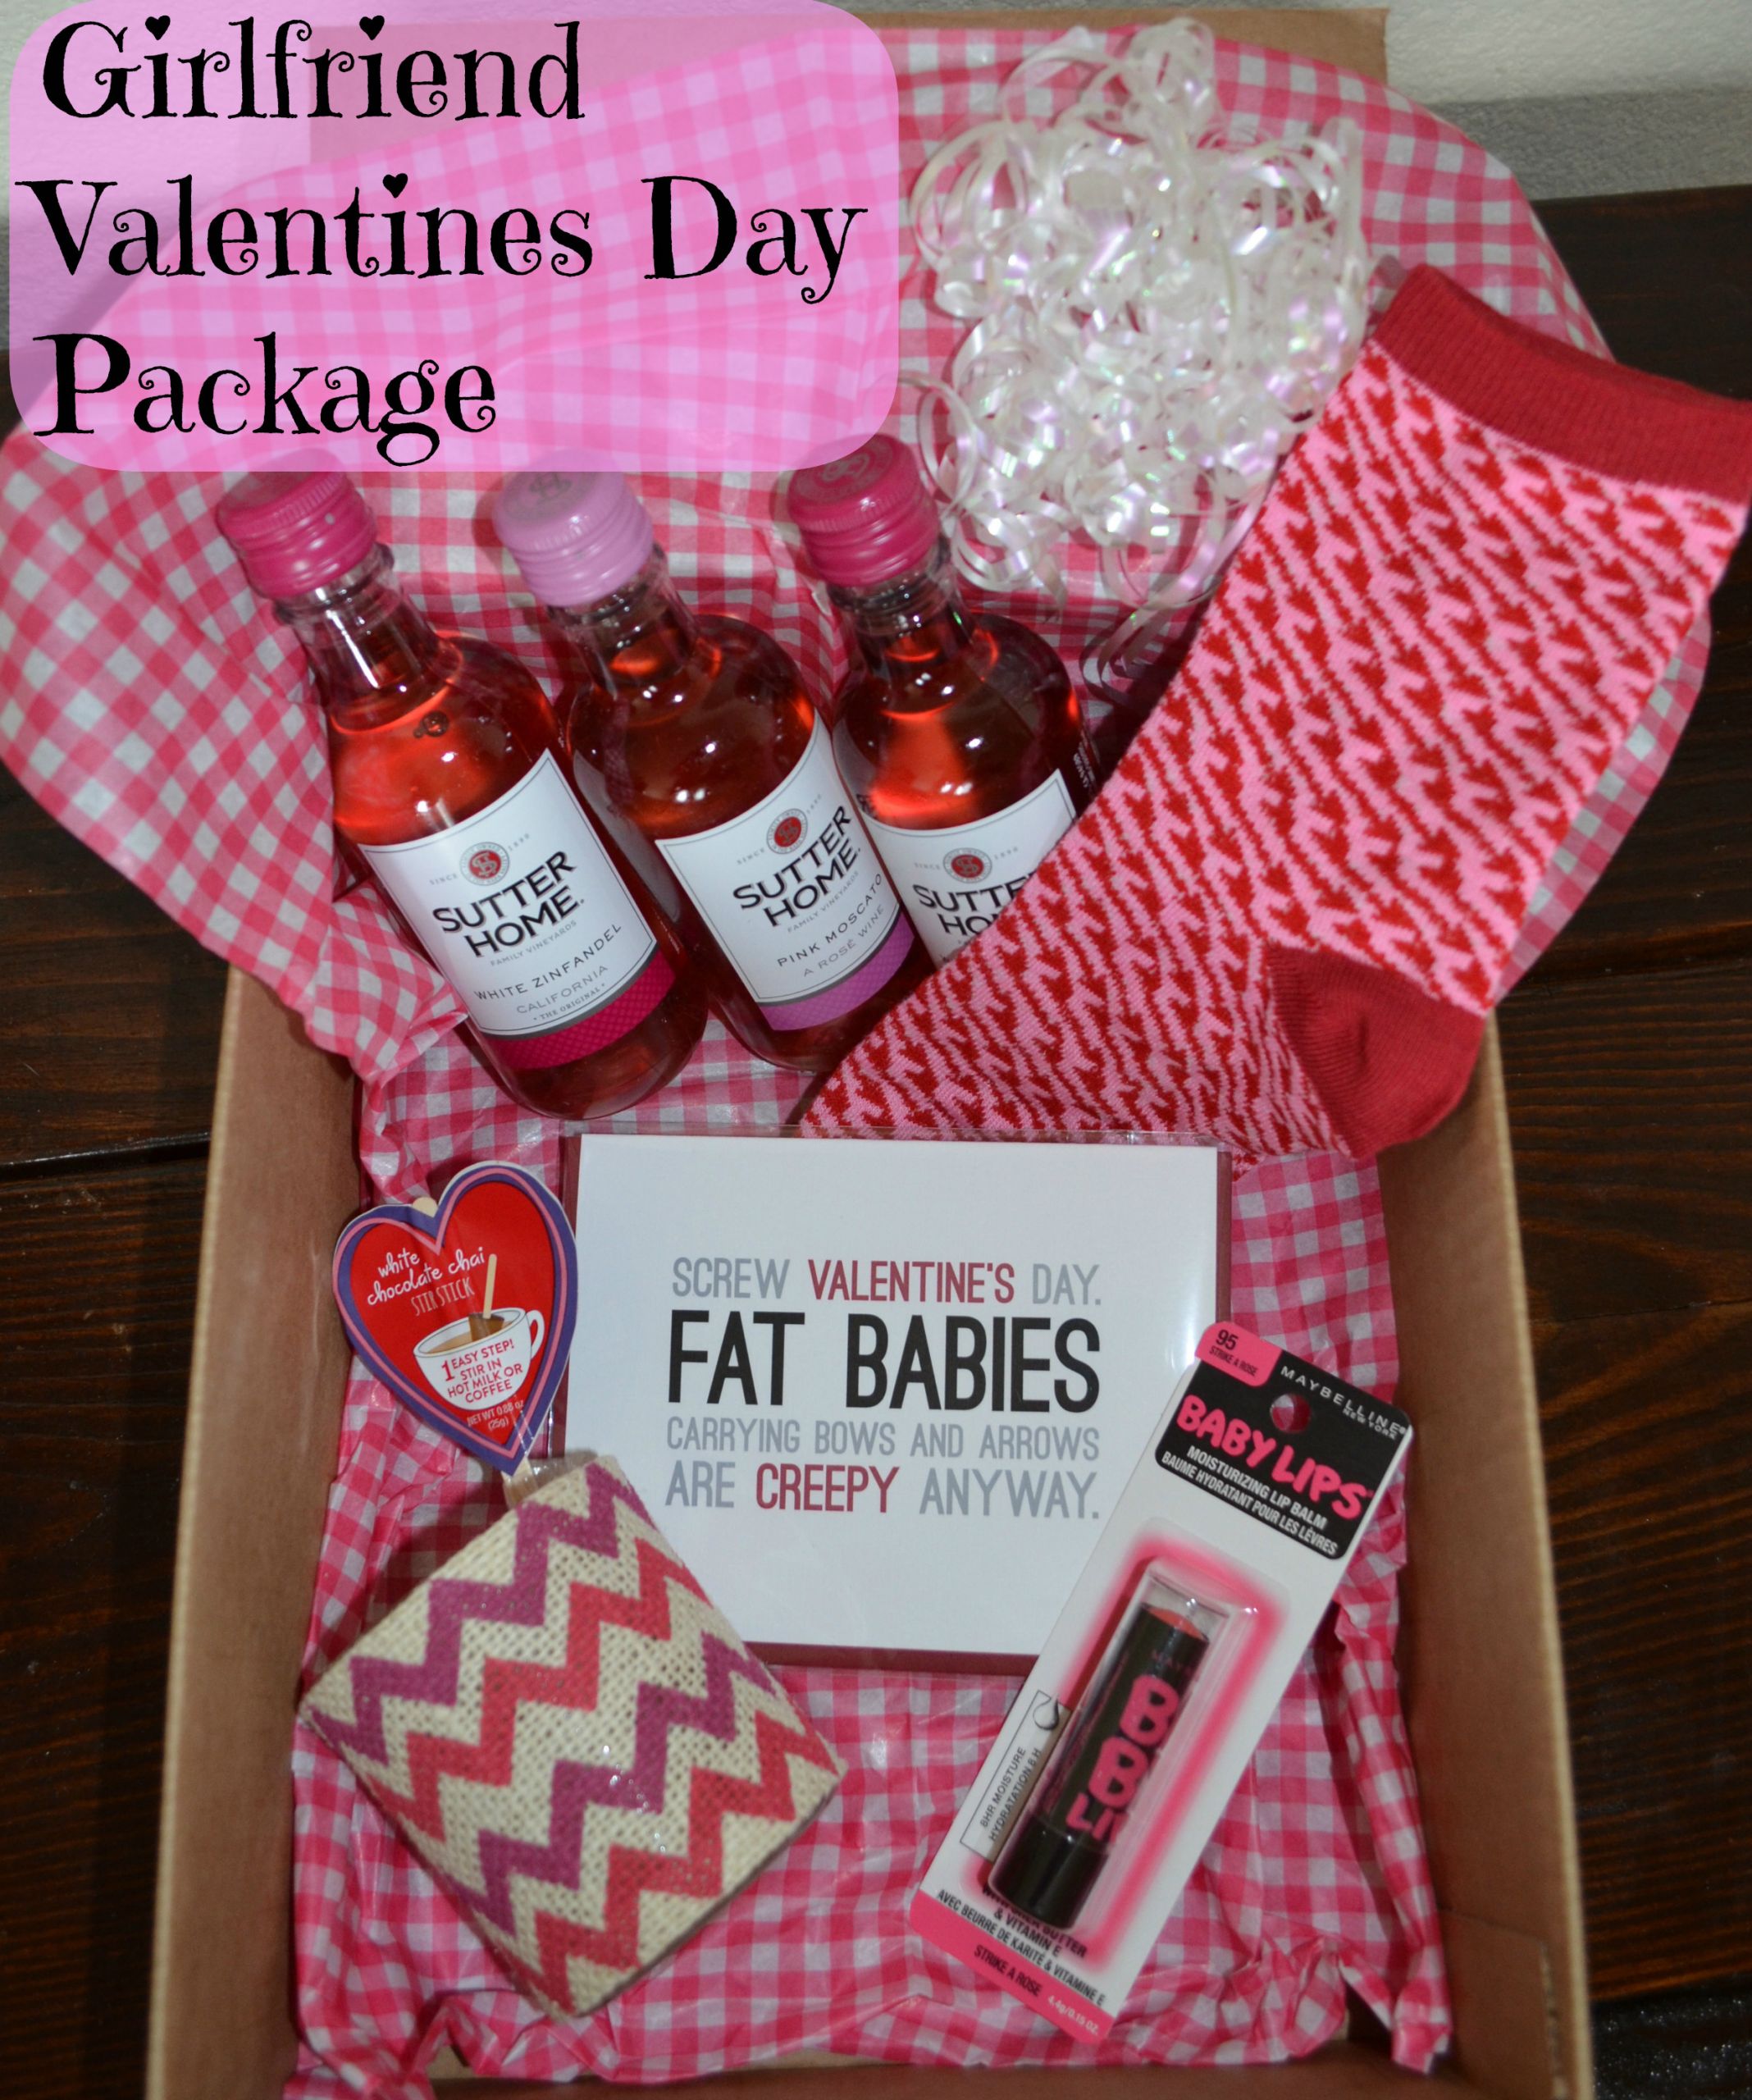 Valentines Day Girlfriend Gift Ideas
 24 ADORABLE GIFT IDEAS FOR THE WOMEN IN YOUR LIFE